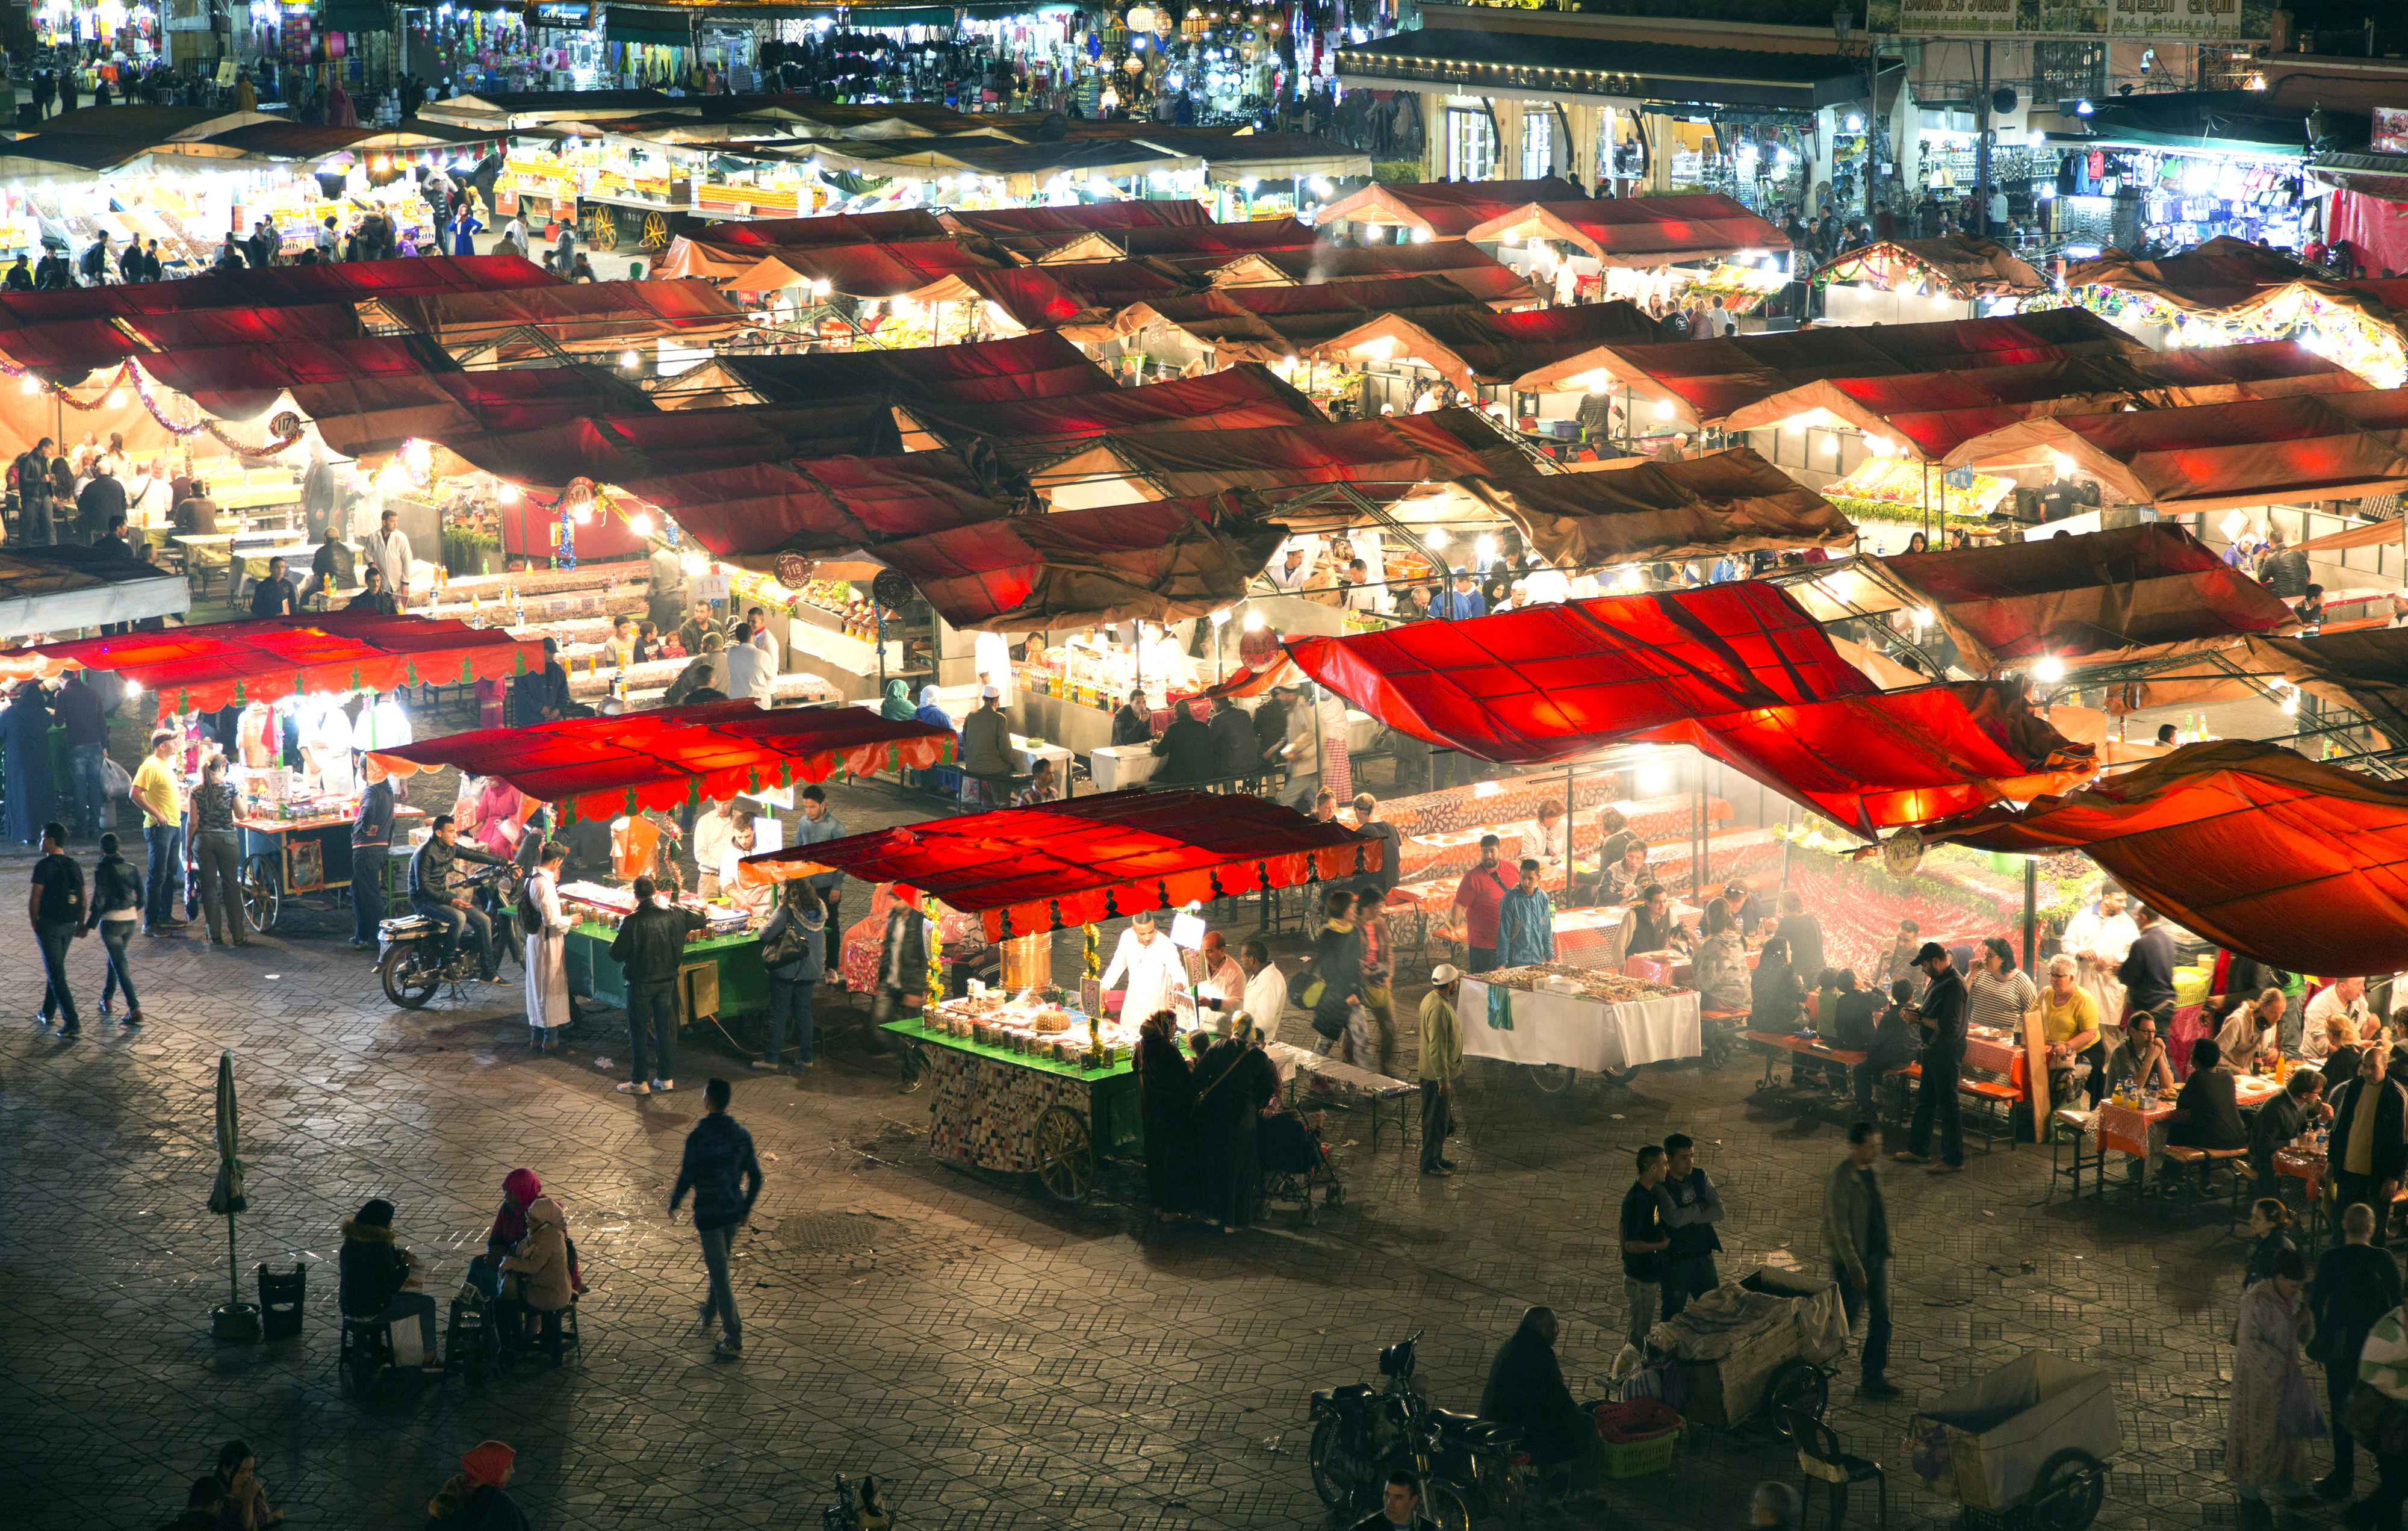 The night market on the square Djemaa el-Fna in Marrakesh, Morocco